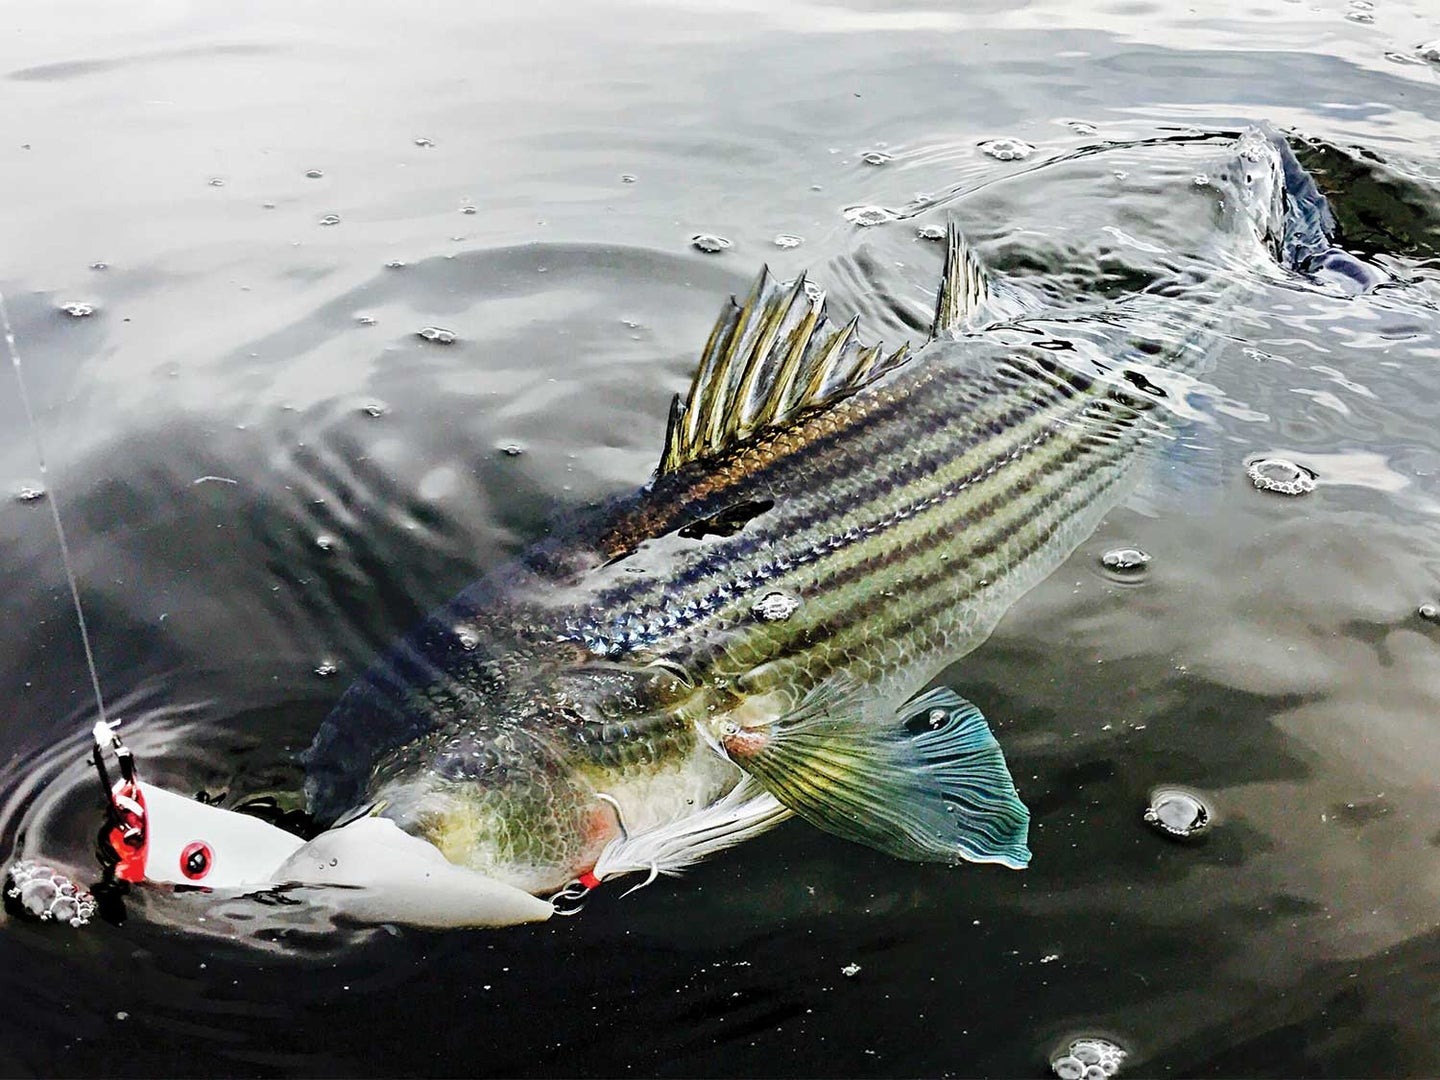 Fishing Tips for Catching Resident Striped Bass